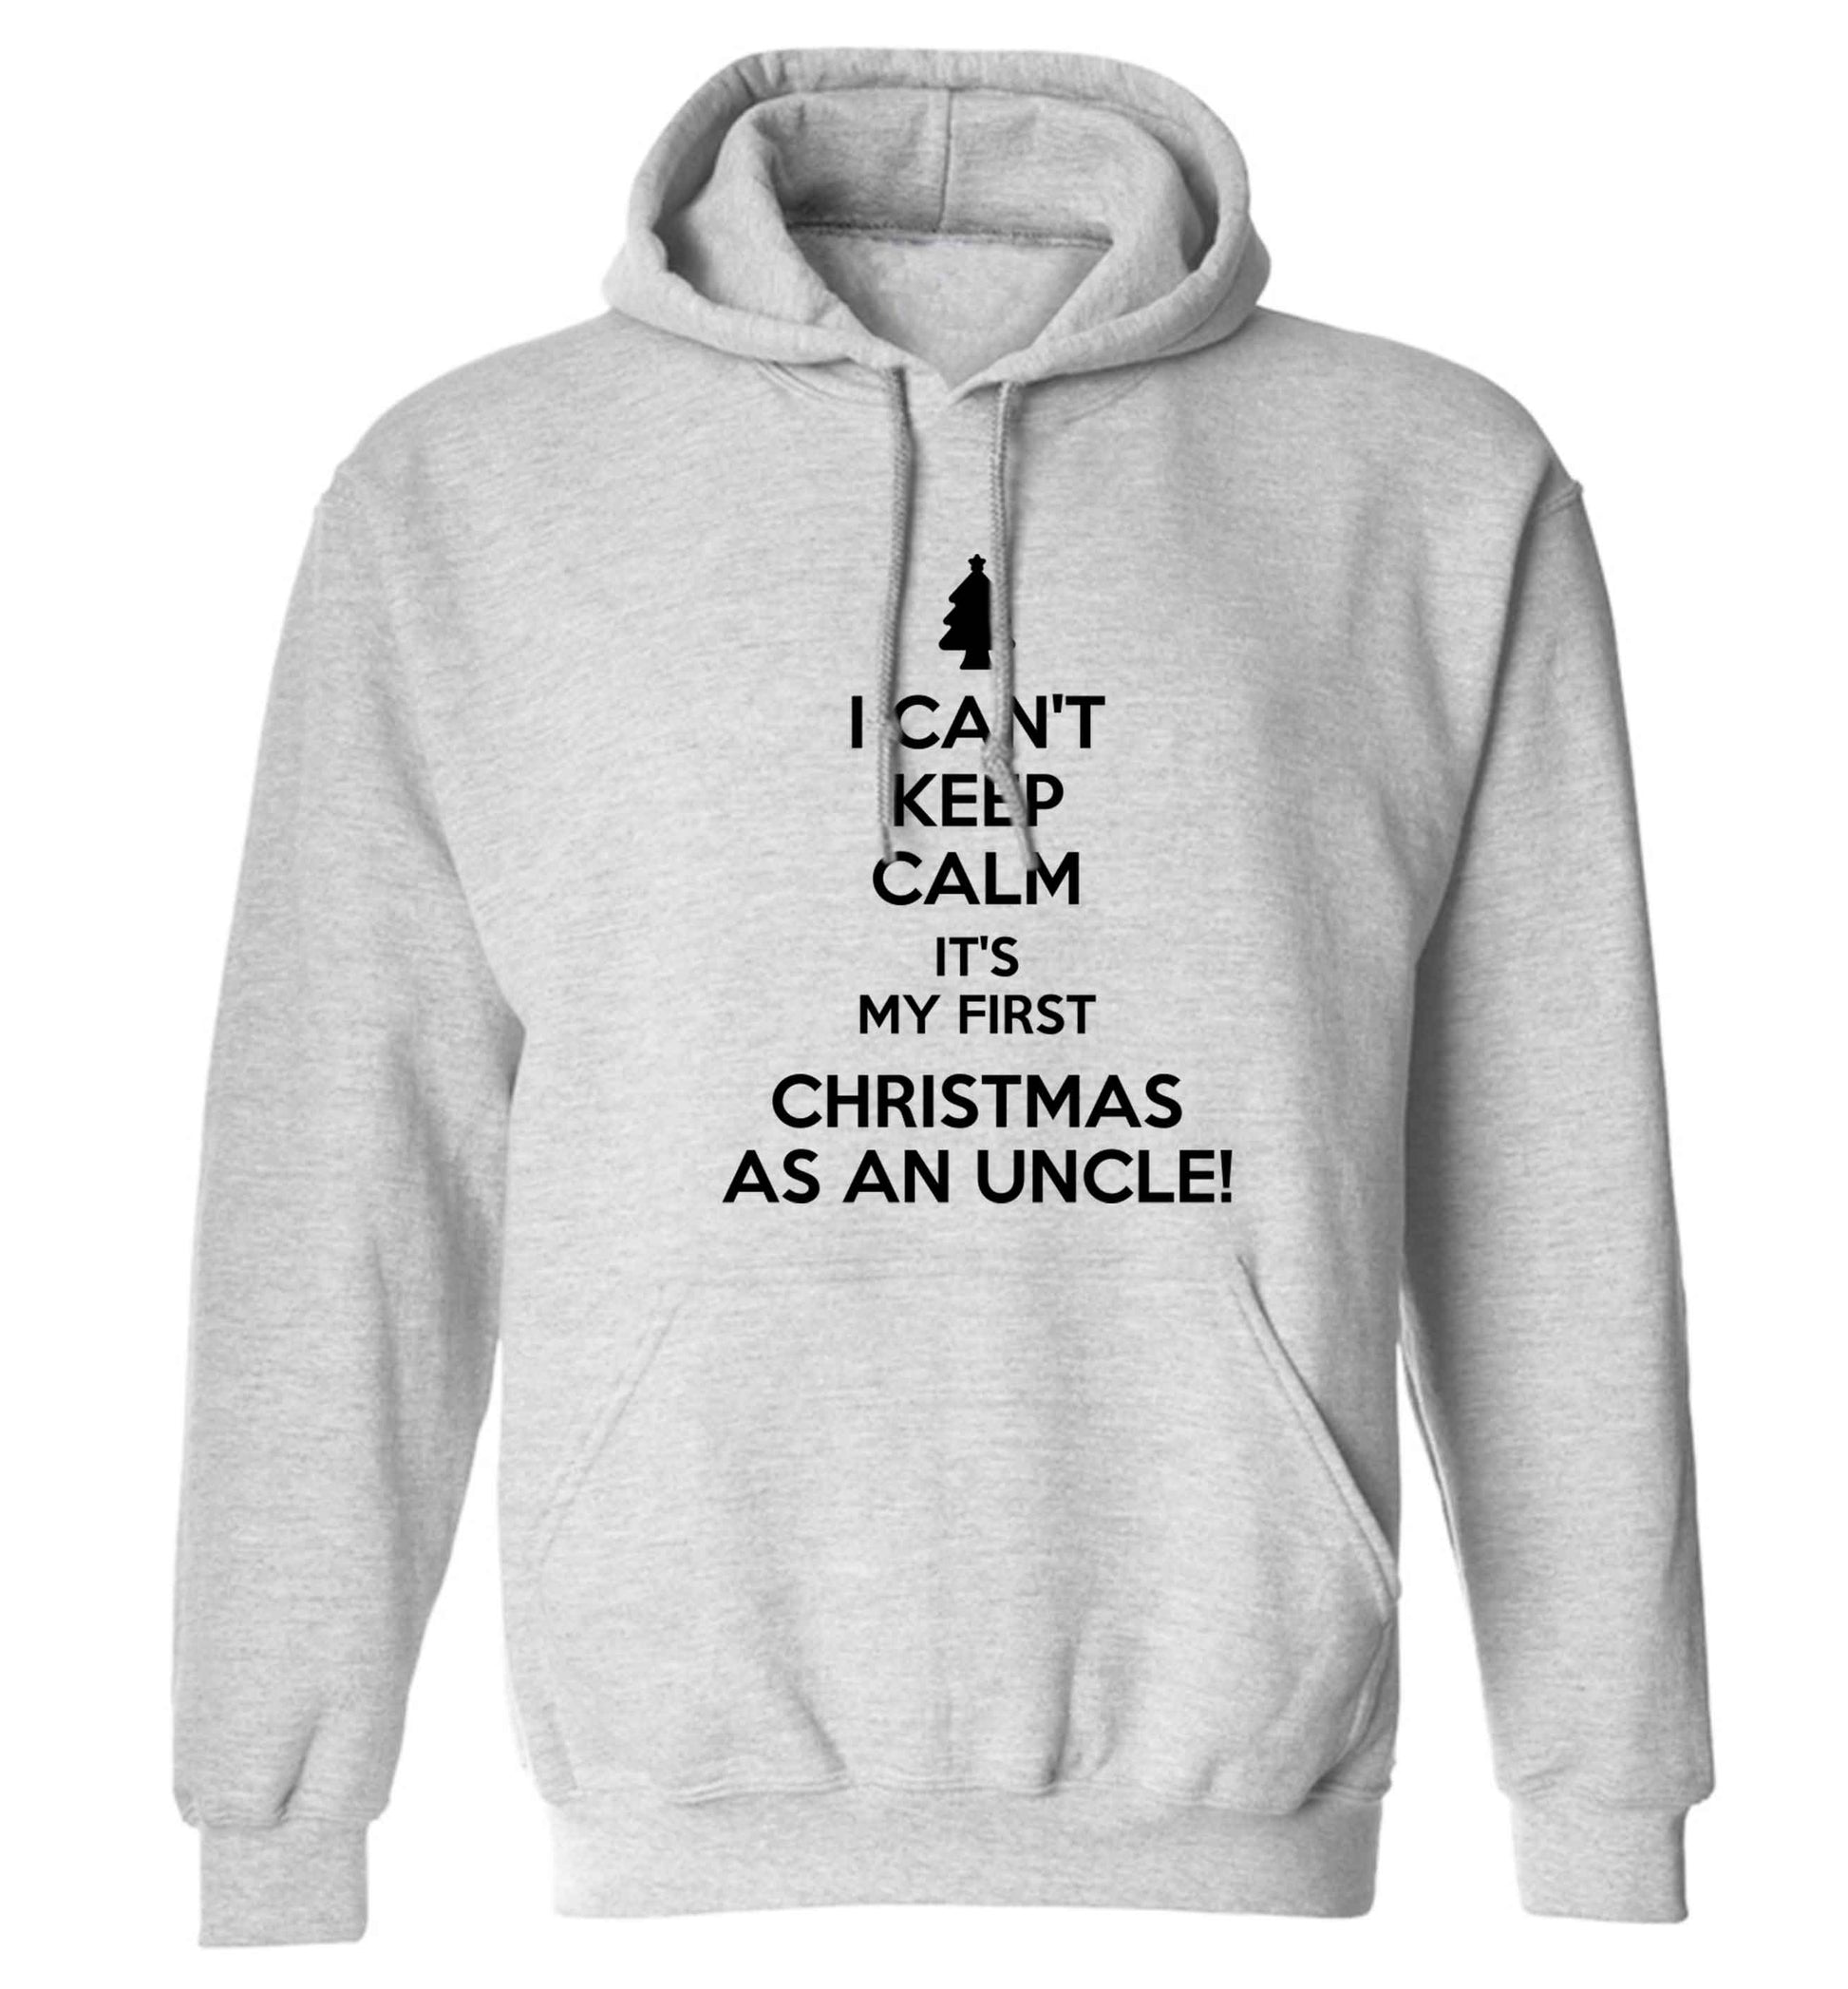 I can't keep calm it's my first Christmas as an uncle! adults unisex grey hoodie 2XL